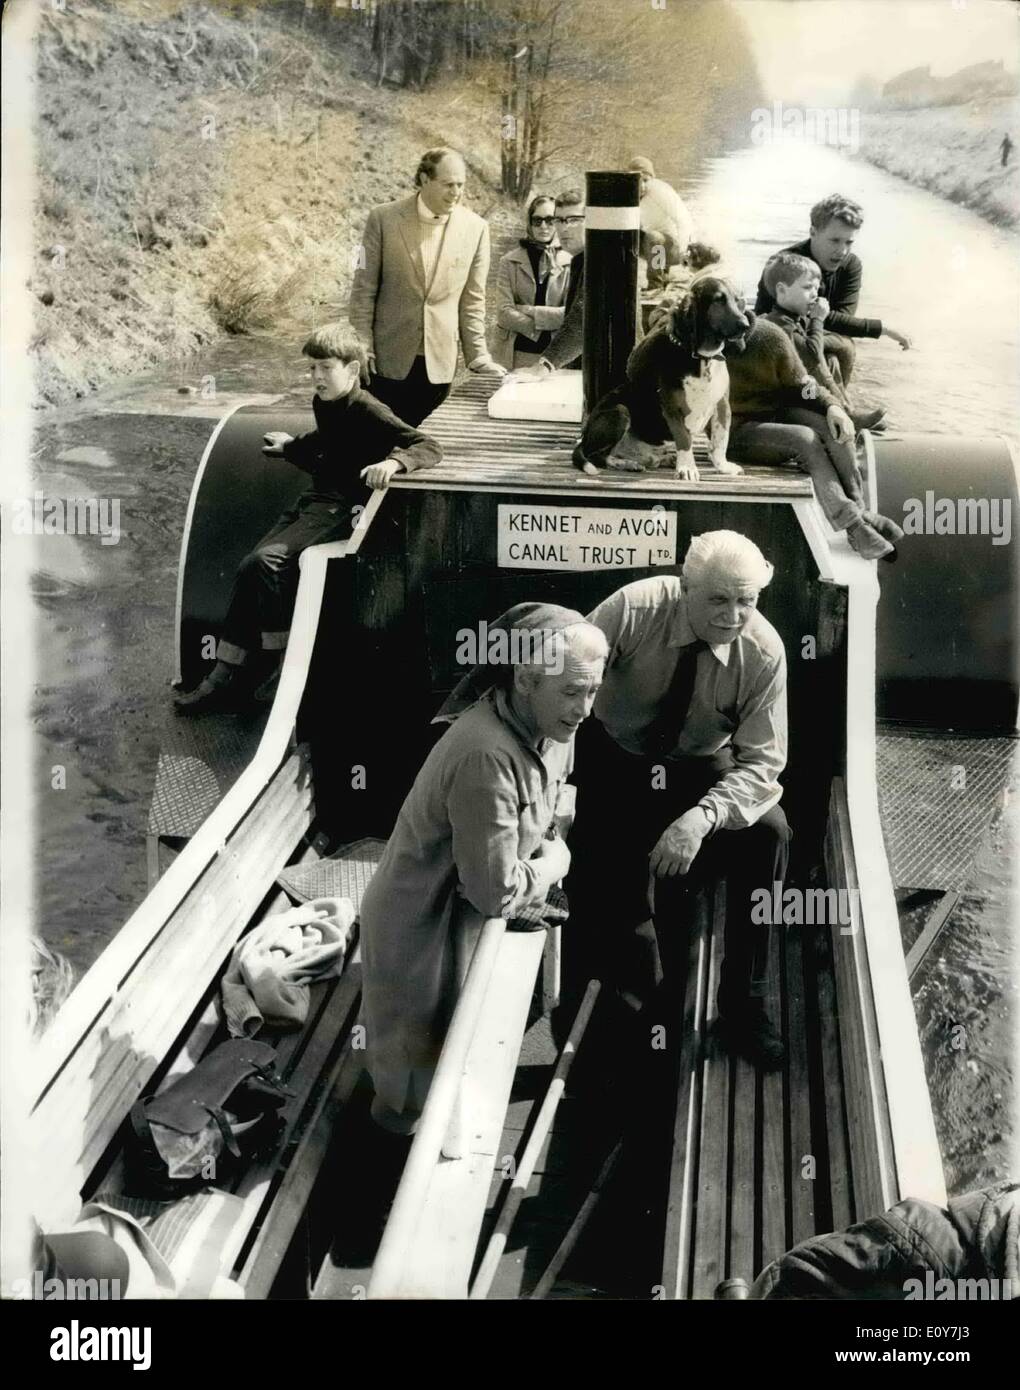 Apr. 04, 1969 - Paddle Boat Brings Hope for Canal.: Gen. Sir Hugh Stockwell, commander of the Allied land forces in the 1956 Suez operation, successfully launch a new campaign when steered the six-ton paddle boat Charlotte Dundas on her maiden passenger voyage along the Kennet ang Avon canal at Devizes, Wilt, yesterday. ''This voyage means that the canal can be made to work,'' said Sir Hugh, who is chairman of the Canal Trust. The Trust see yesterday's 30-minute trip, made at a comfortable two miles an hour, as a major step towards opening up the canal for public pleasure craft Stock Photo